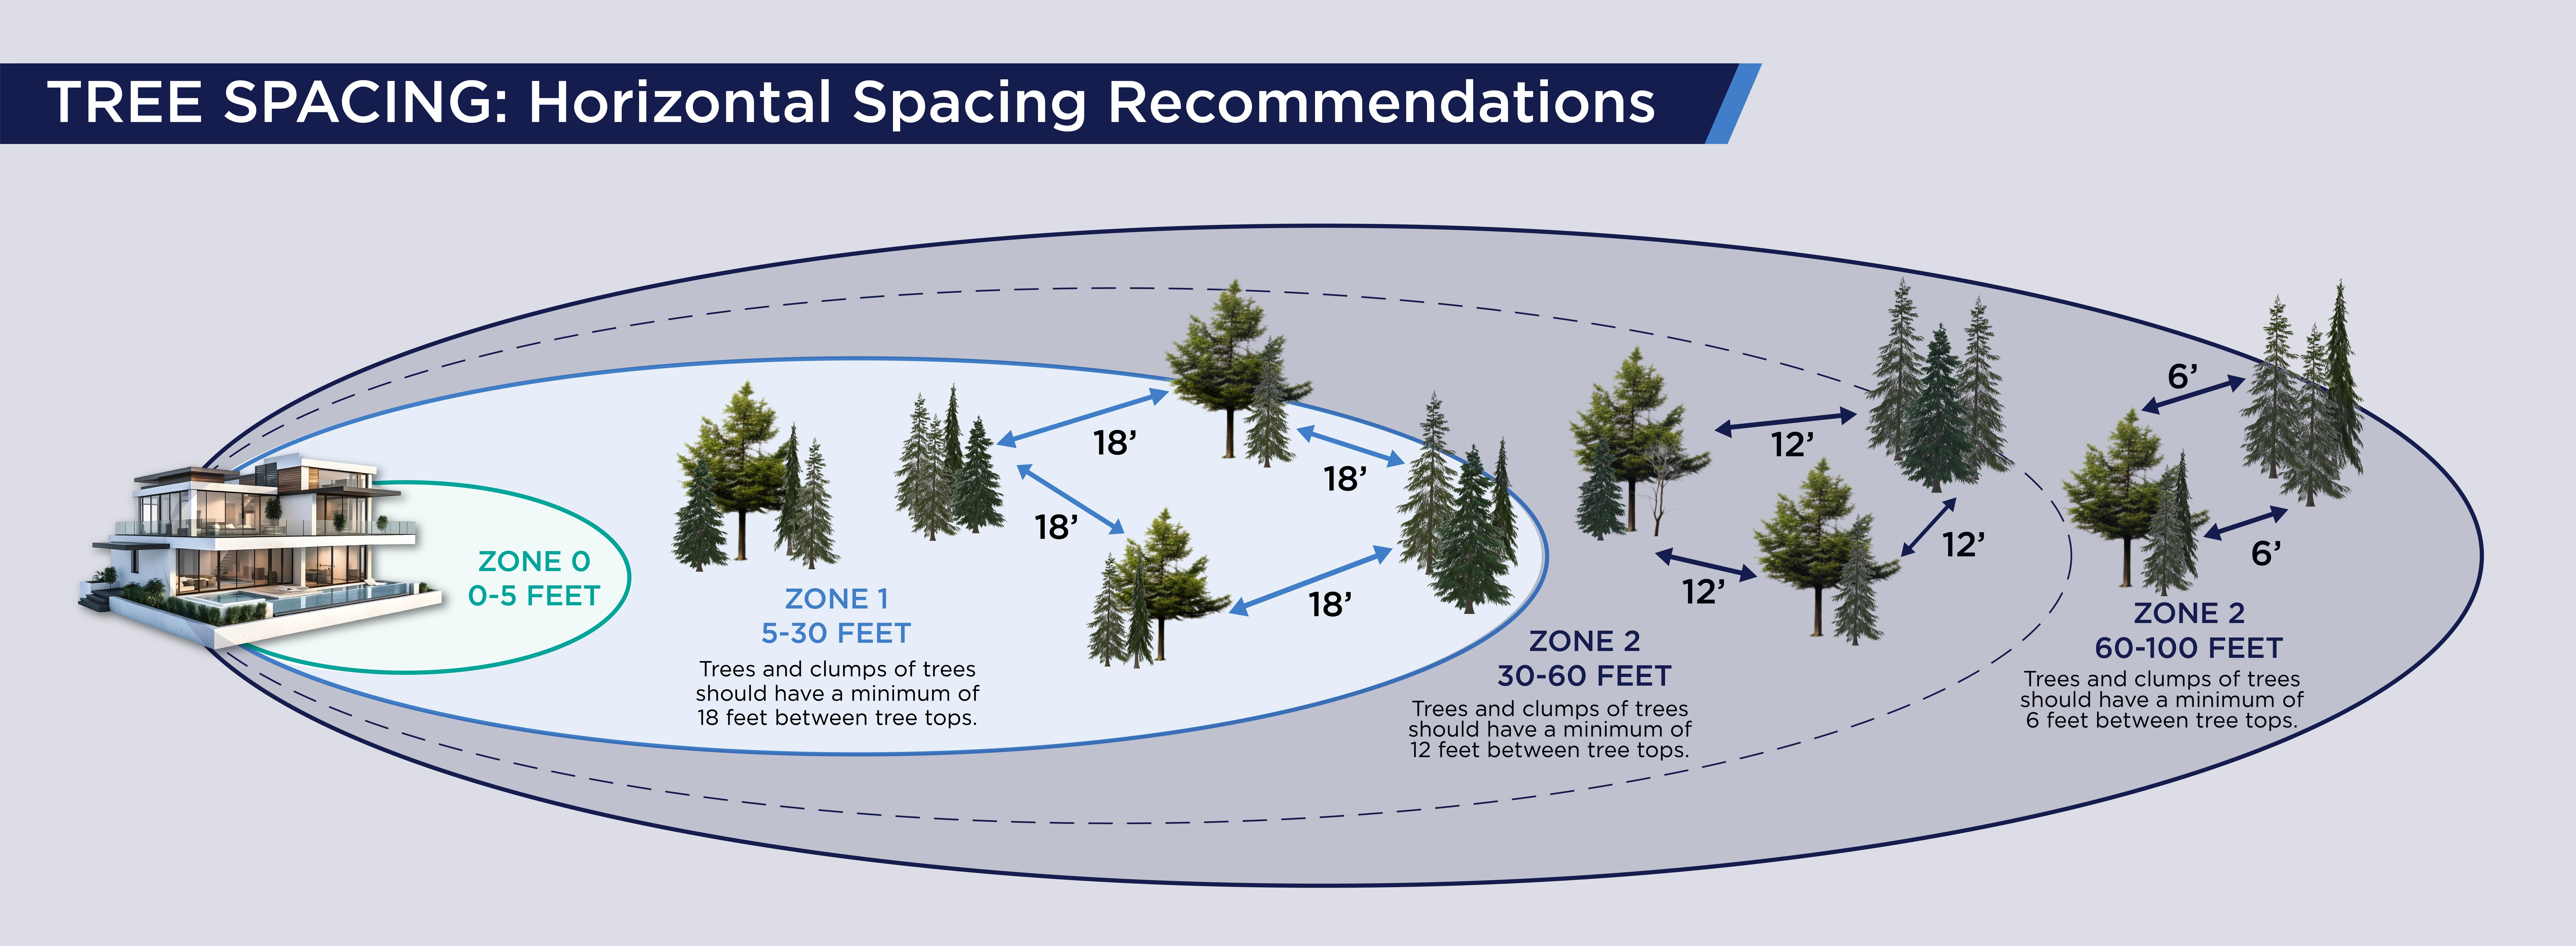 Defensible zone; tree spacing recommendations- horizontal spacing infographic.